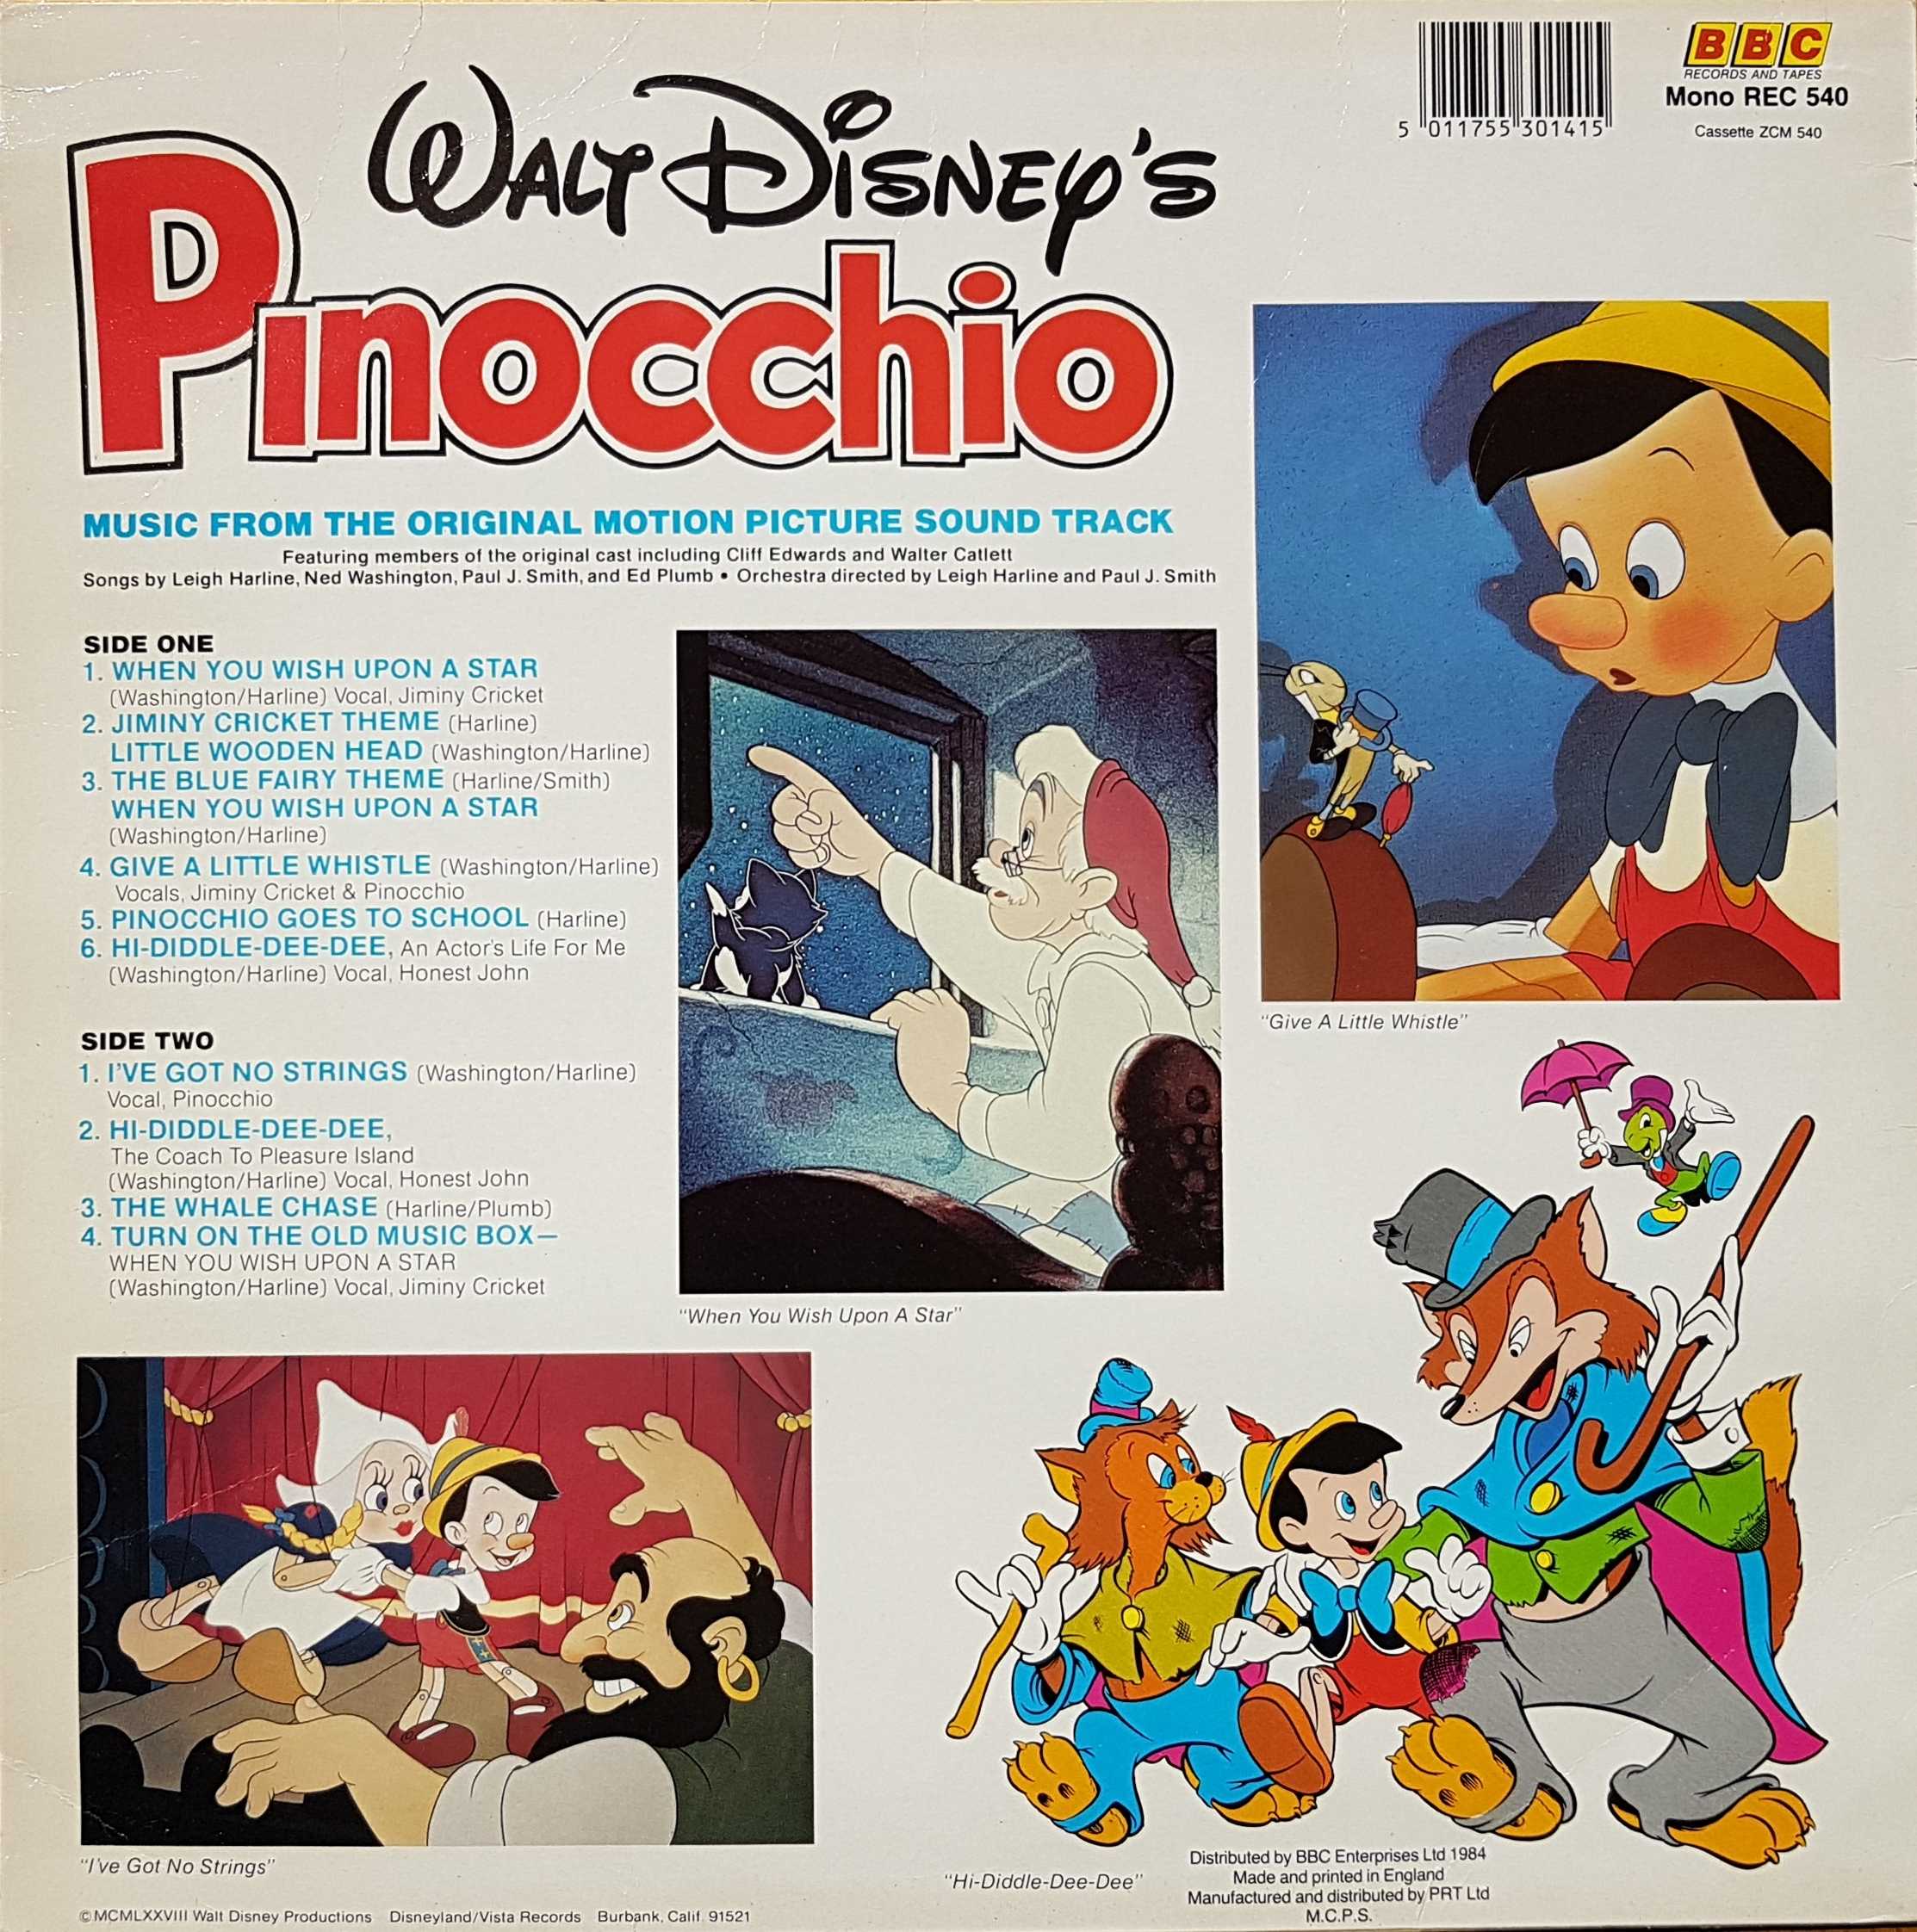 Picture of REC 540 Pinocchio by artist Leigh Harline / Ned Washington / Paul J. Smith / Ed Plumb from the BBC records and Tapes library